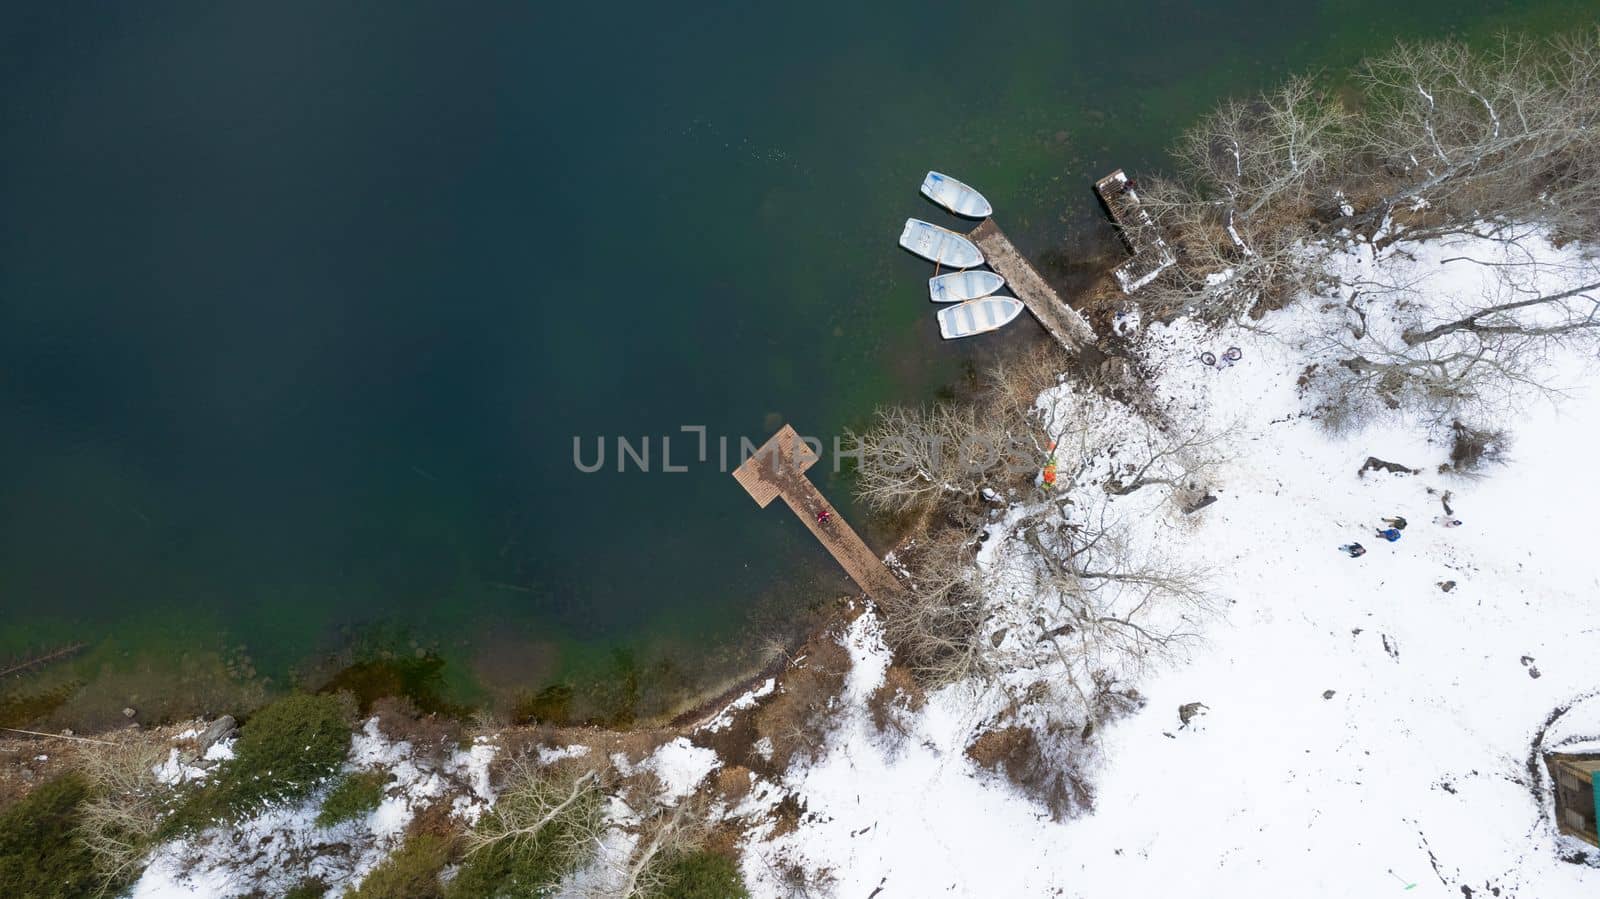 Kolsai mountain lake in the winter forest. Drone view of the pier with boats, trees, clear smooth water, snow lying on the ground. Rocks are visible in the water. Kazakhstan, Almaty